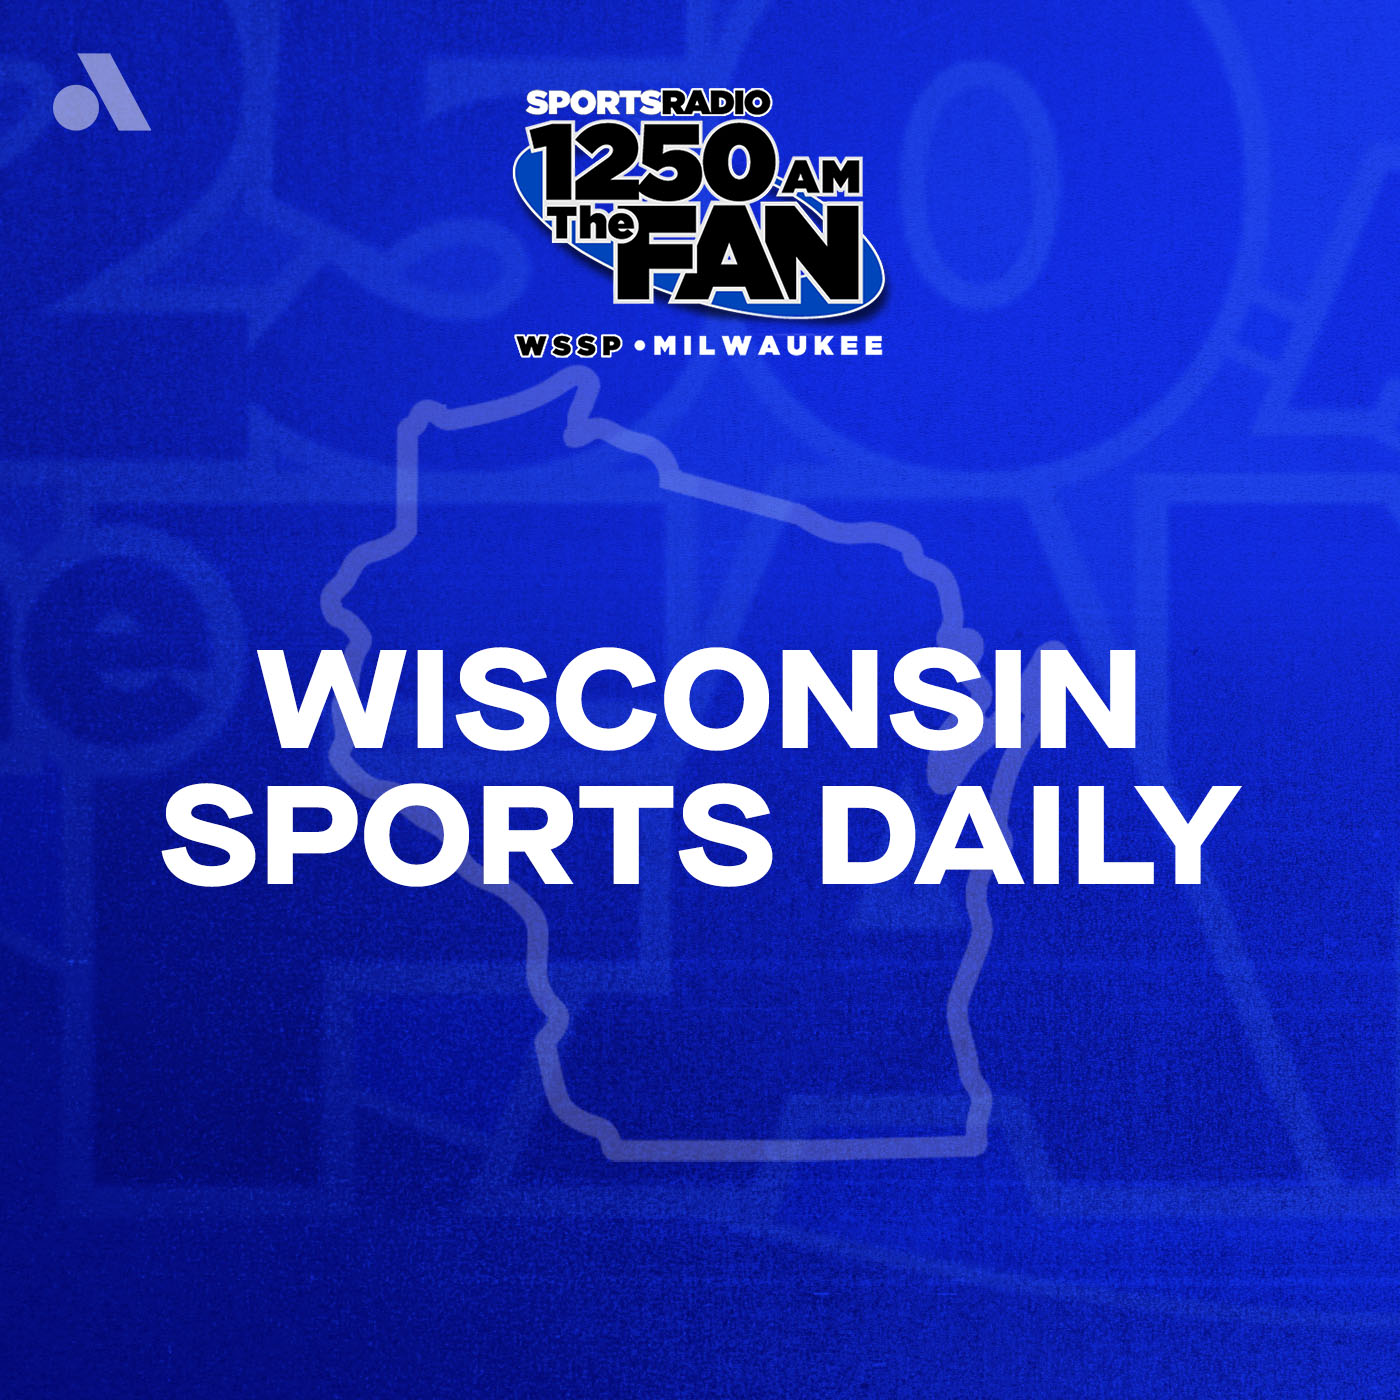 Wednesday, May 15th: Richard Ryman of the Green Bay Press-Gazette Join Wisconsin Sports Daily